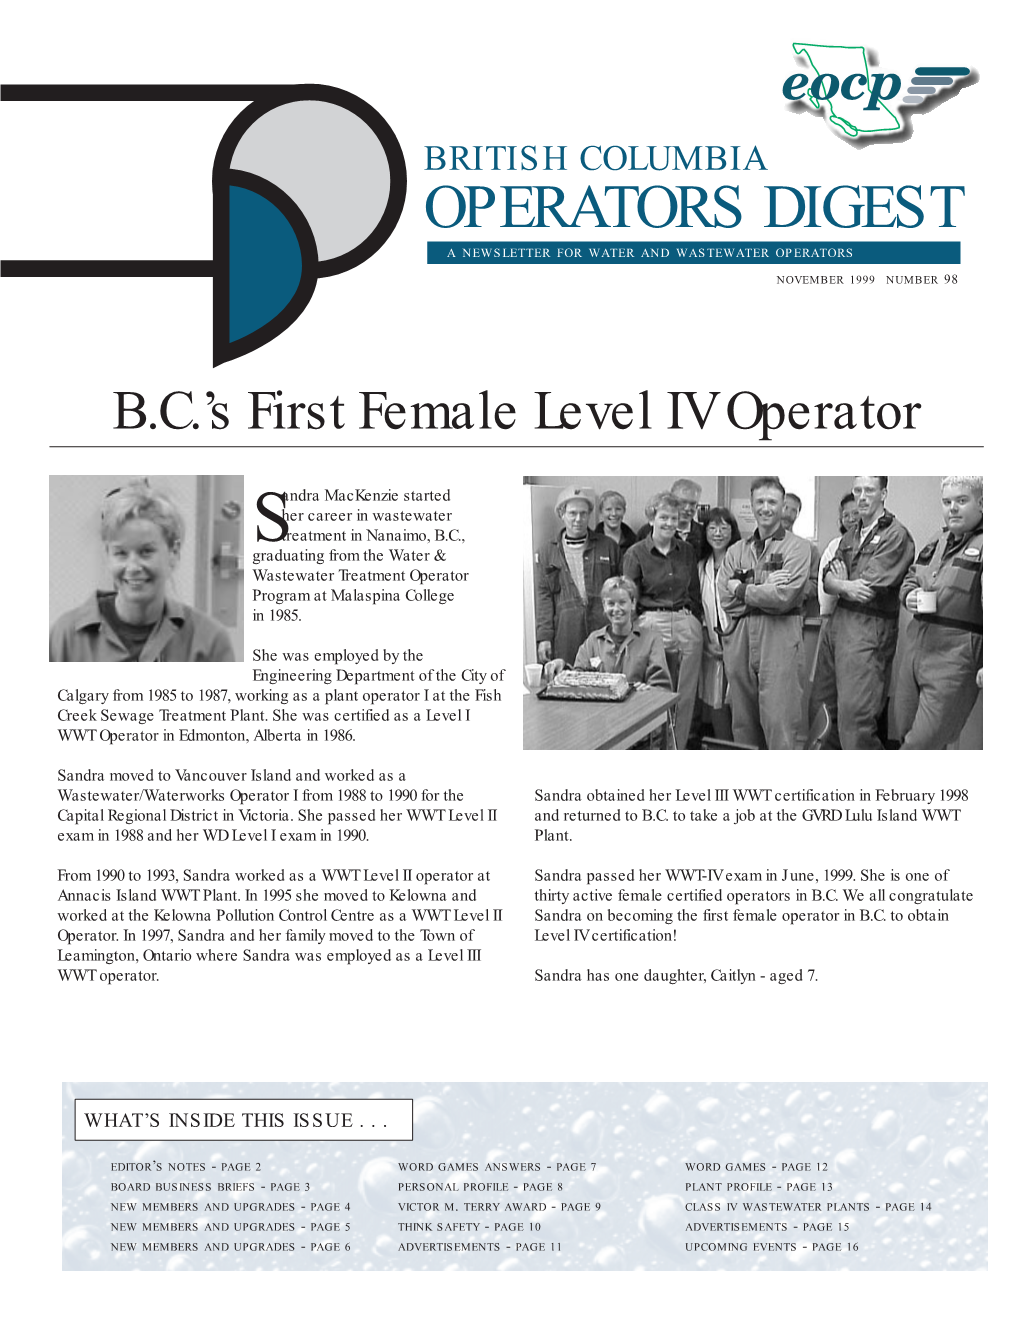 Operators Digest a Newsletter for Water and Wastewater Operators